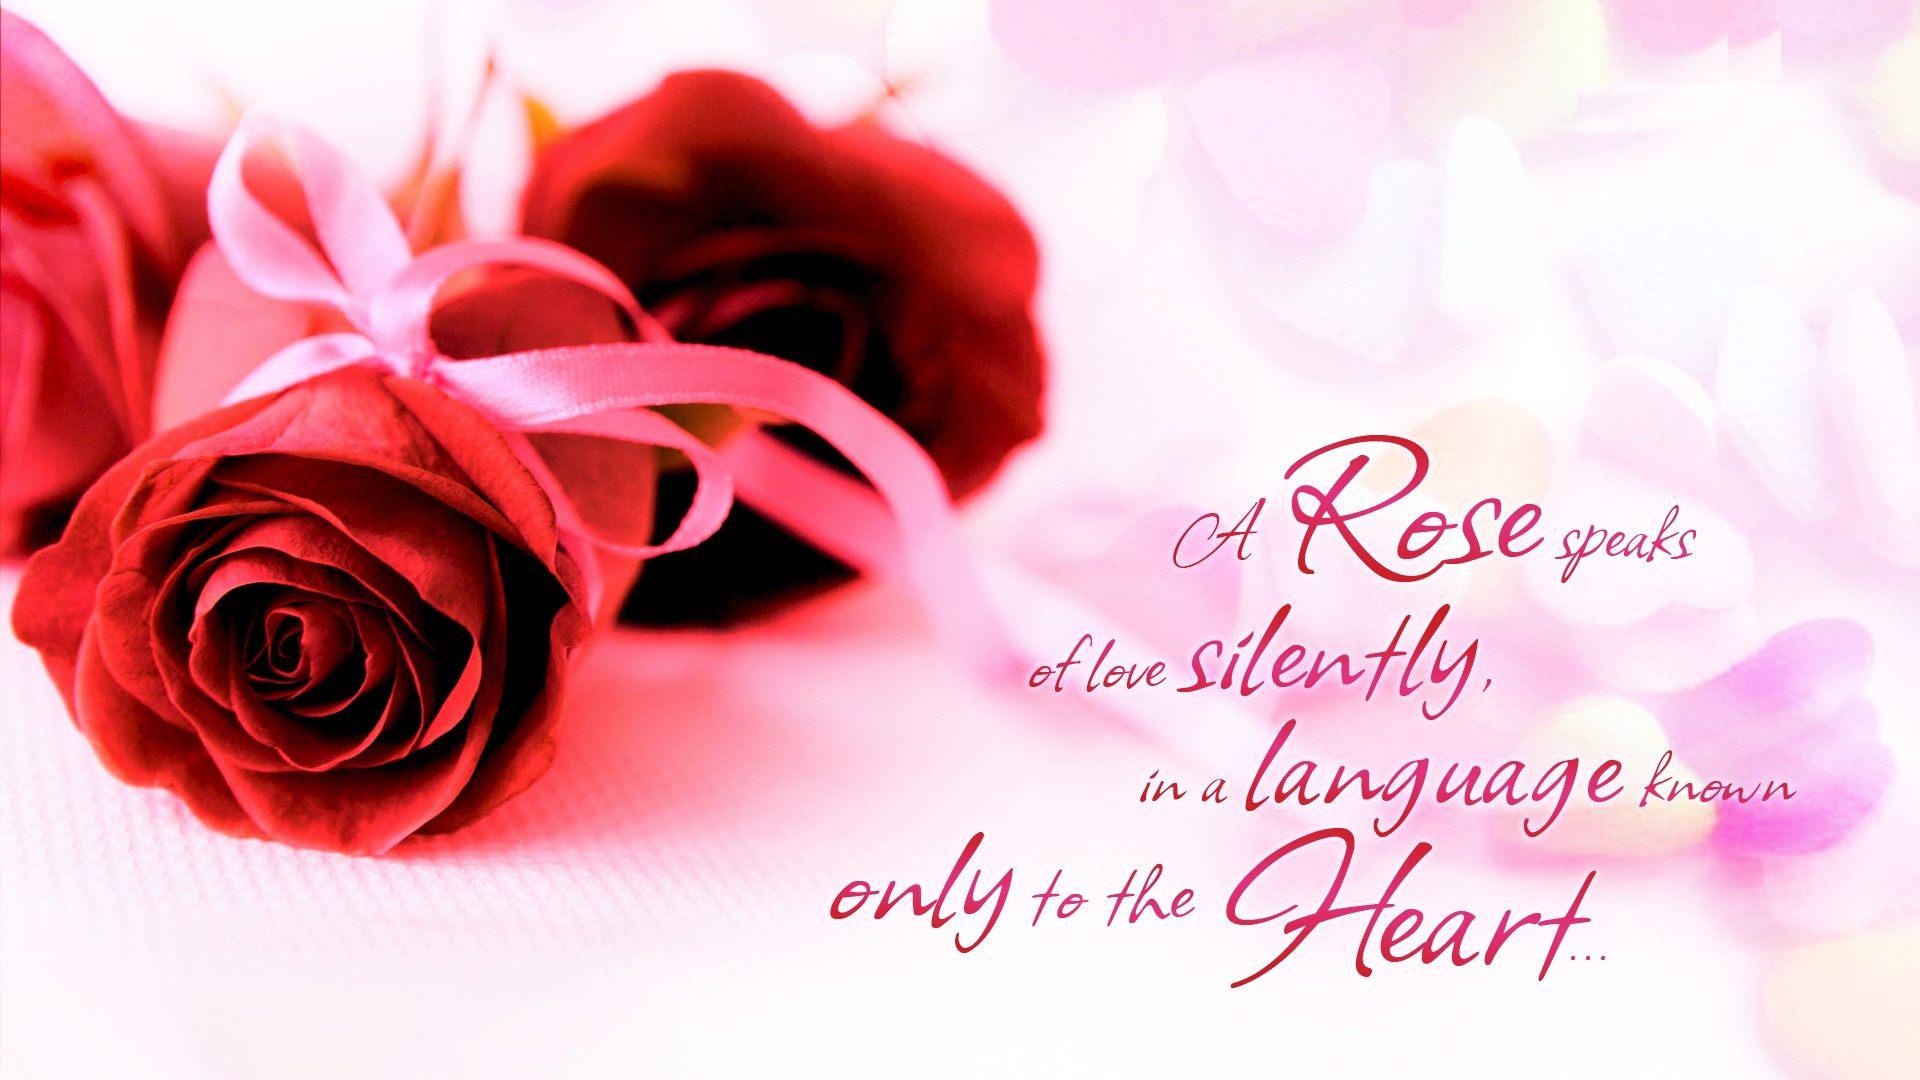 Beautiful Rose And Love Quotes Wallpaper Full High